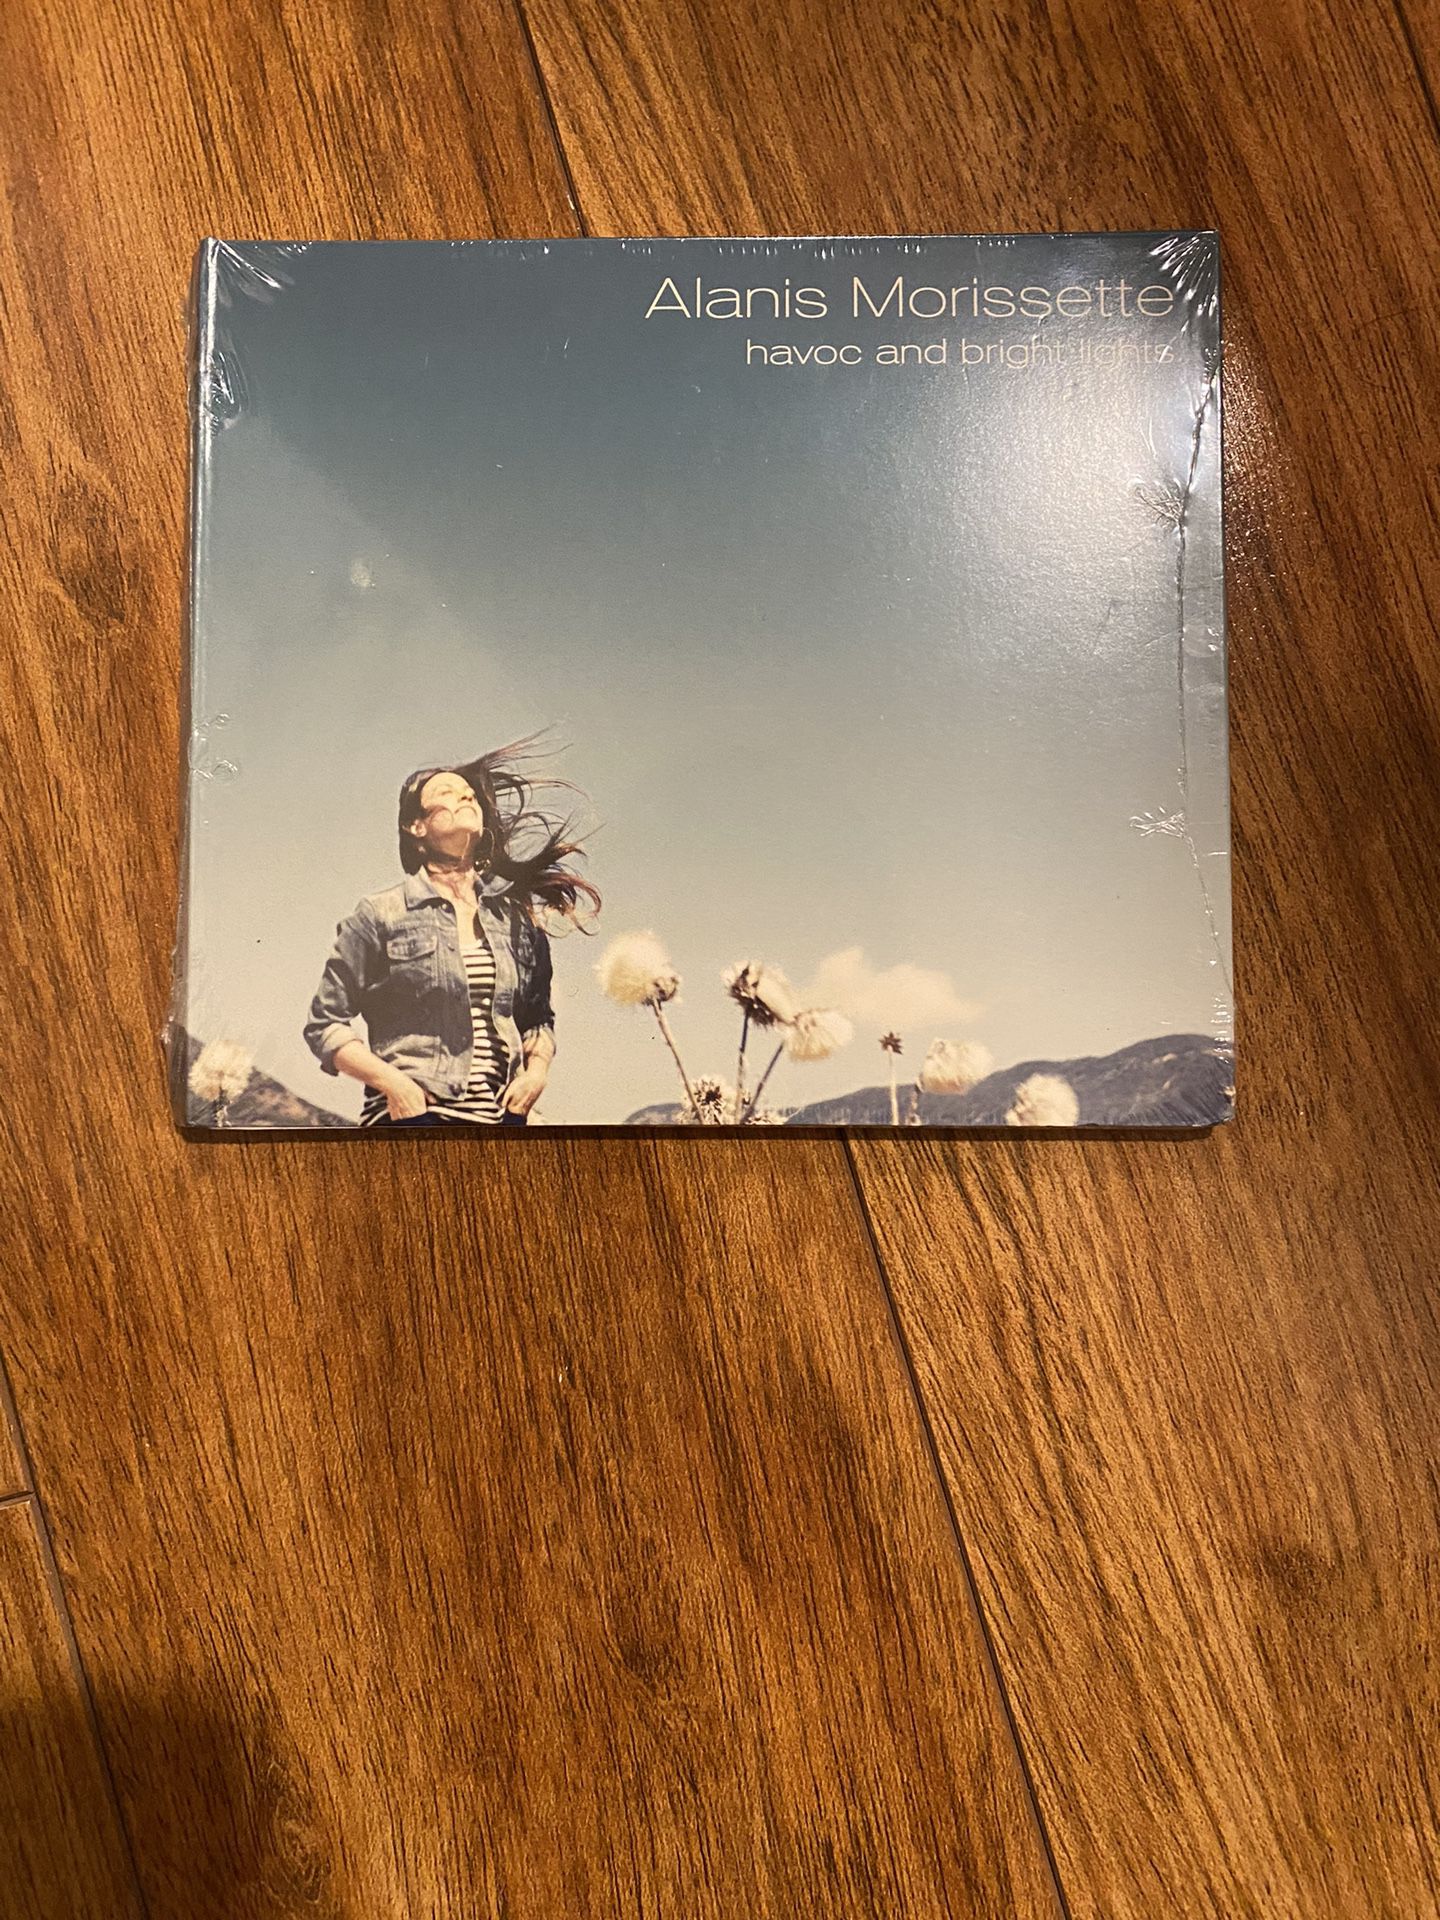 Havoc and Bright Lights [Digipak] by Alanis Morissette (CD, Aug-2012, Collective